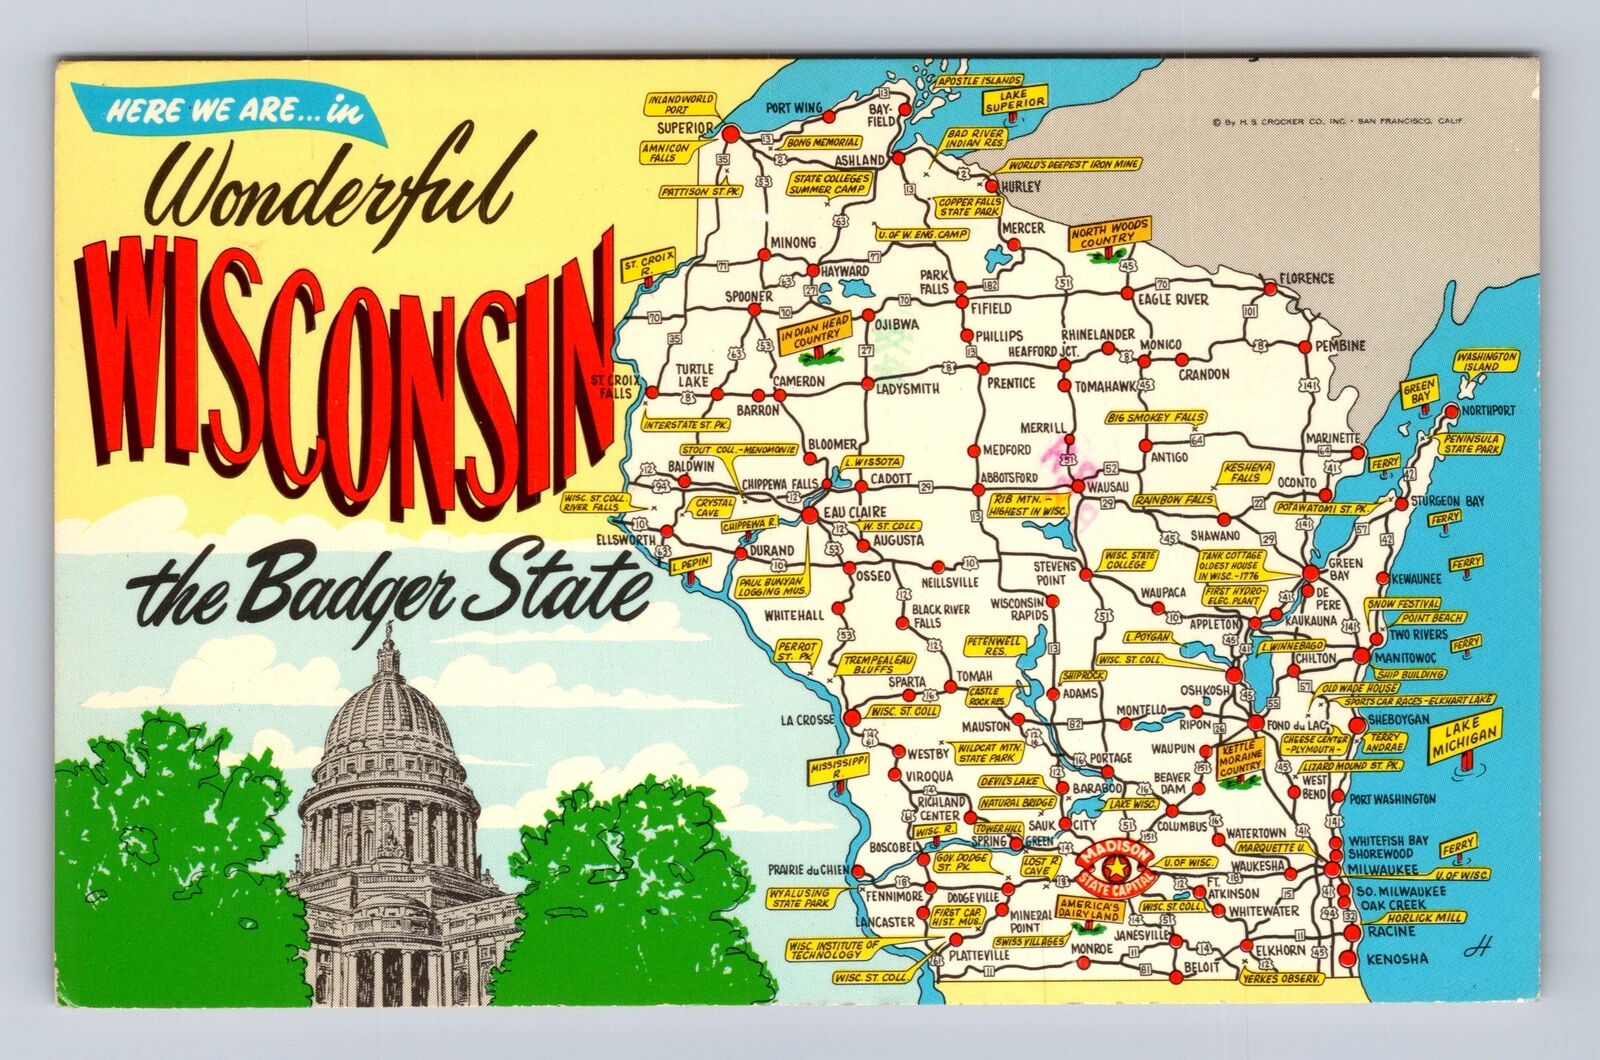 Wonderful Wisconsin, The Badger State, State Map, Capitol, Vintage Postcard